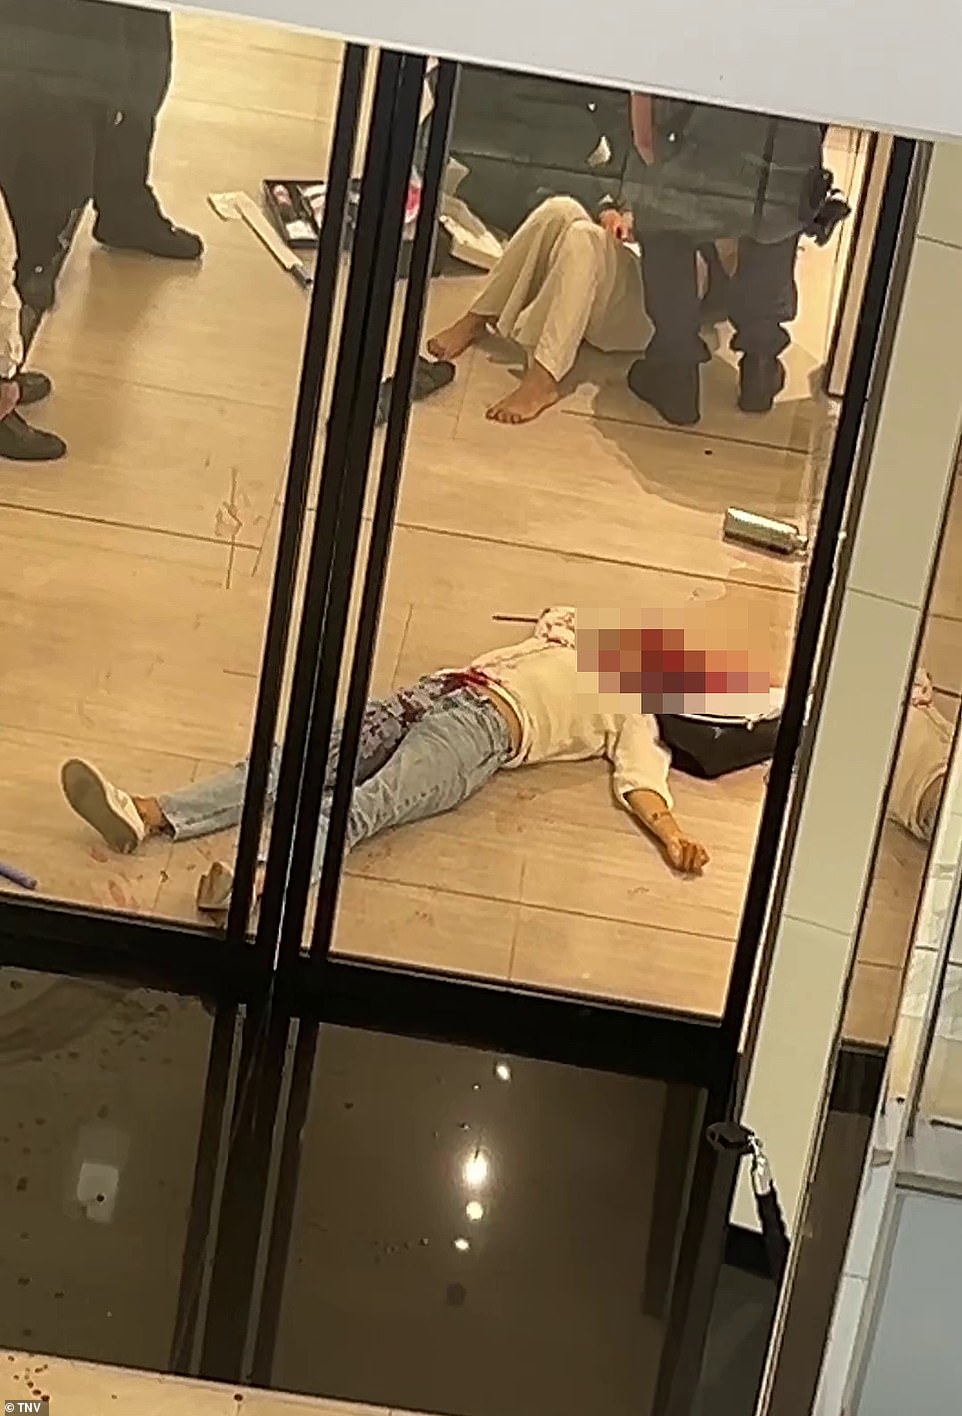 The victims of the attack were left lying in the shopping center as police worked to stop the attack.